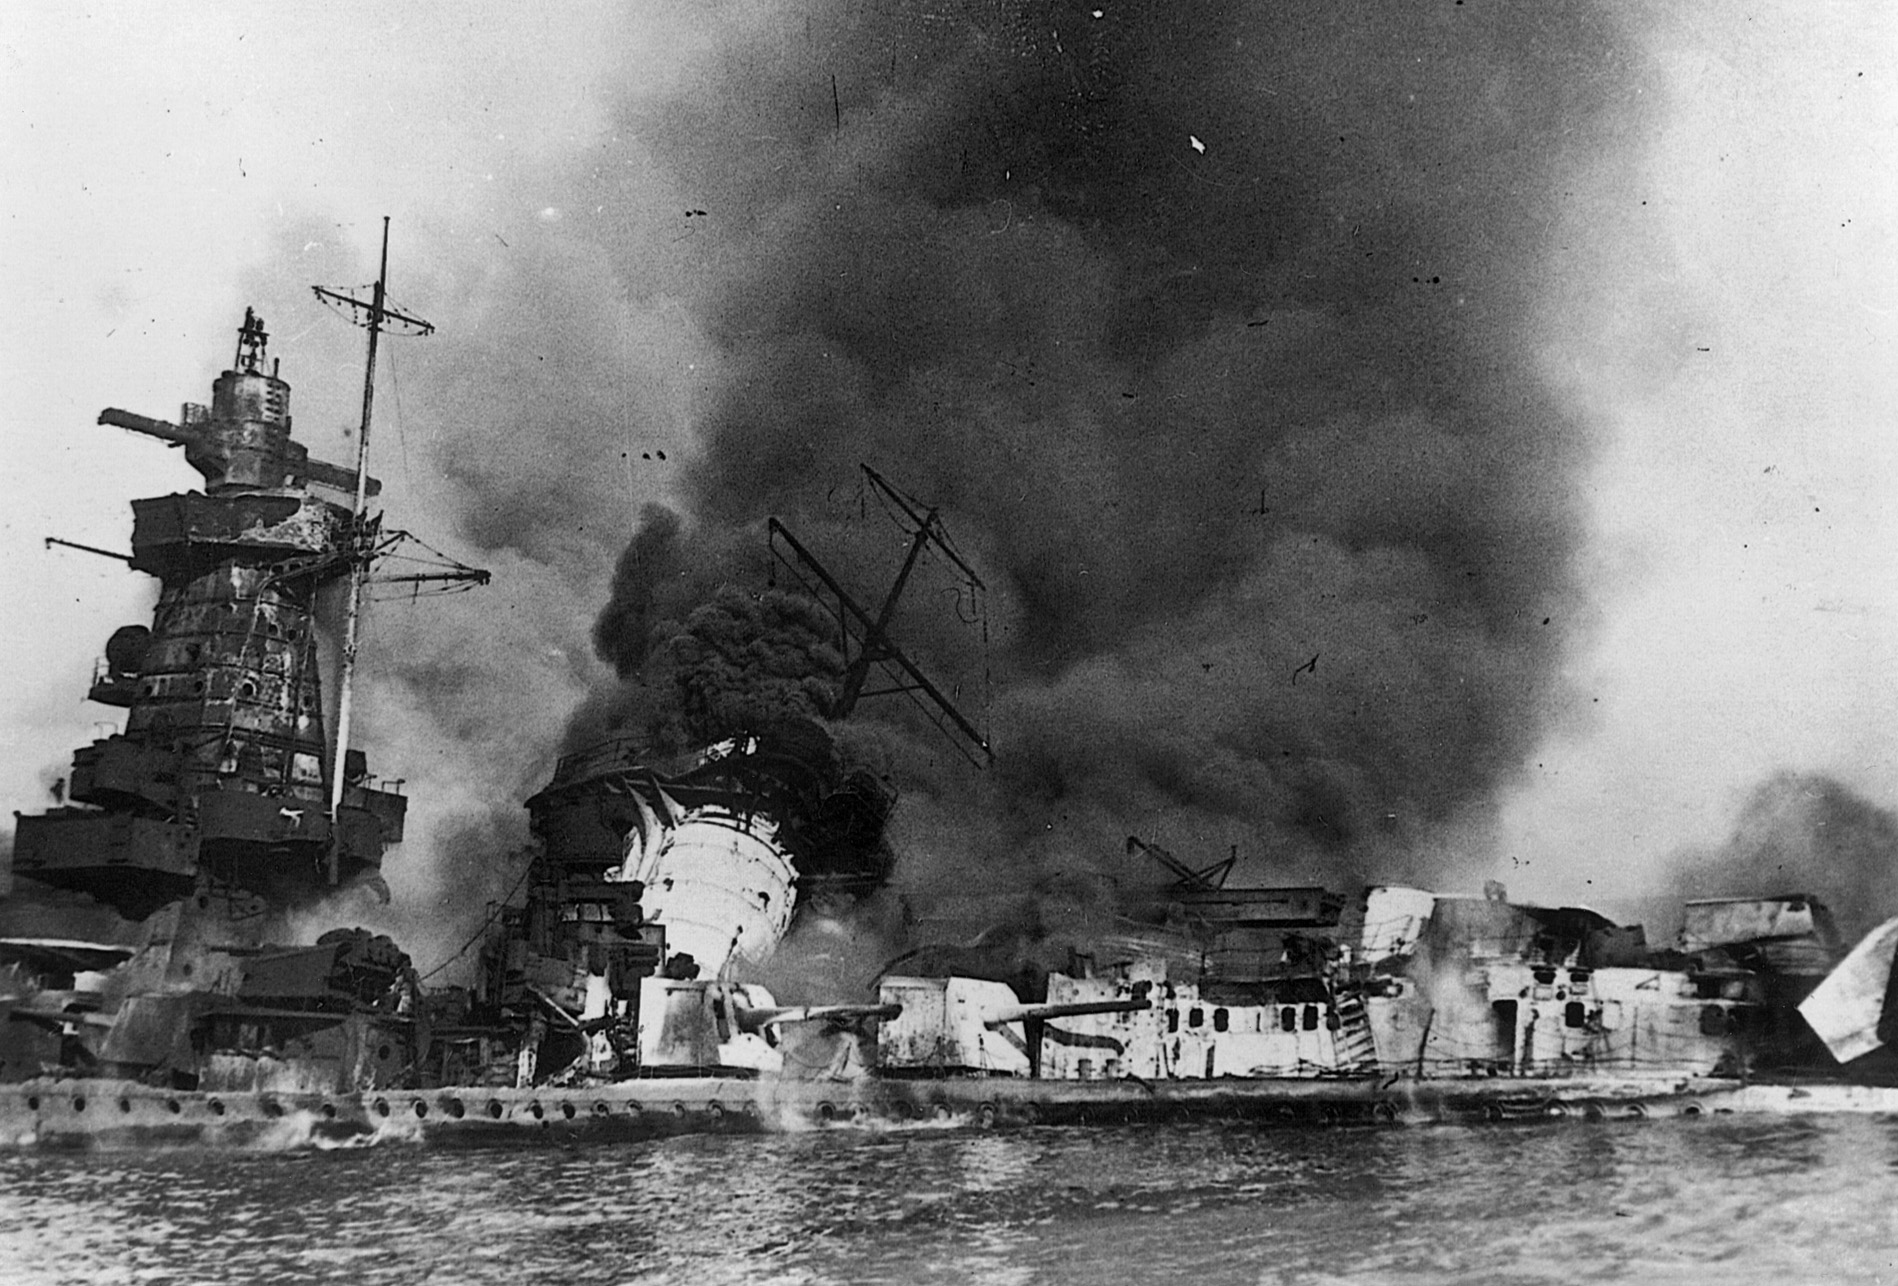 Shortly after charges placed to scuttle the pocket battleship in the estuary of the River Plate were detonated, the Graf Spee burns and settles in relatively shallow water off the coast of Uruguay on December 18, 1939. News of the German surface raider’s demise was welcomed in Britain during the difficult early days of World War II.